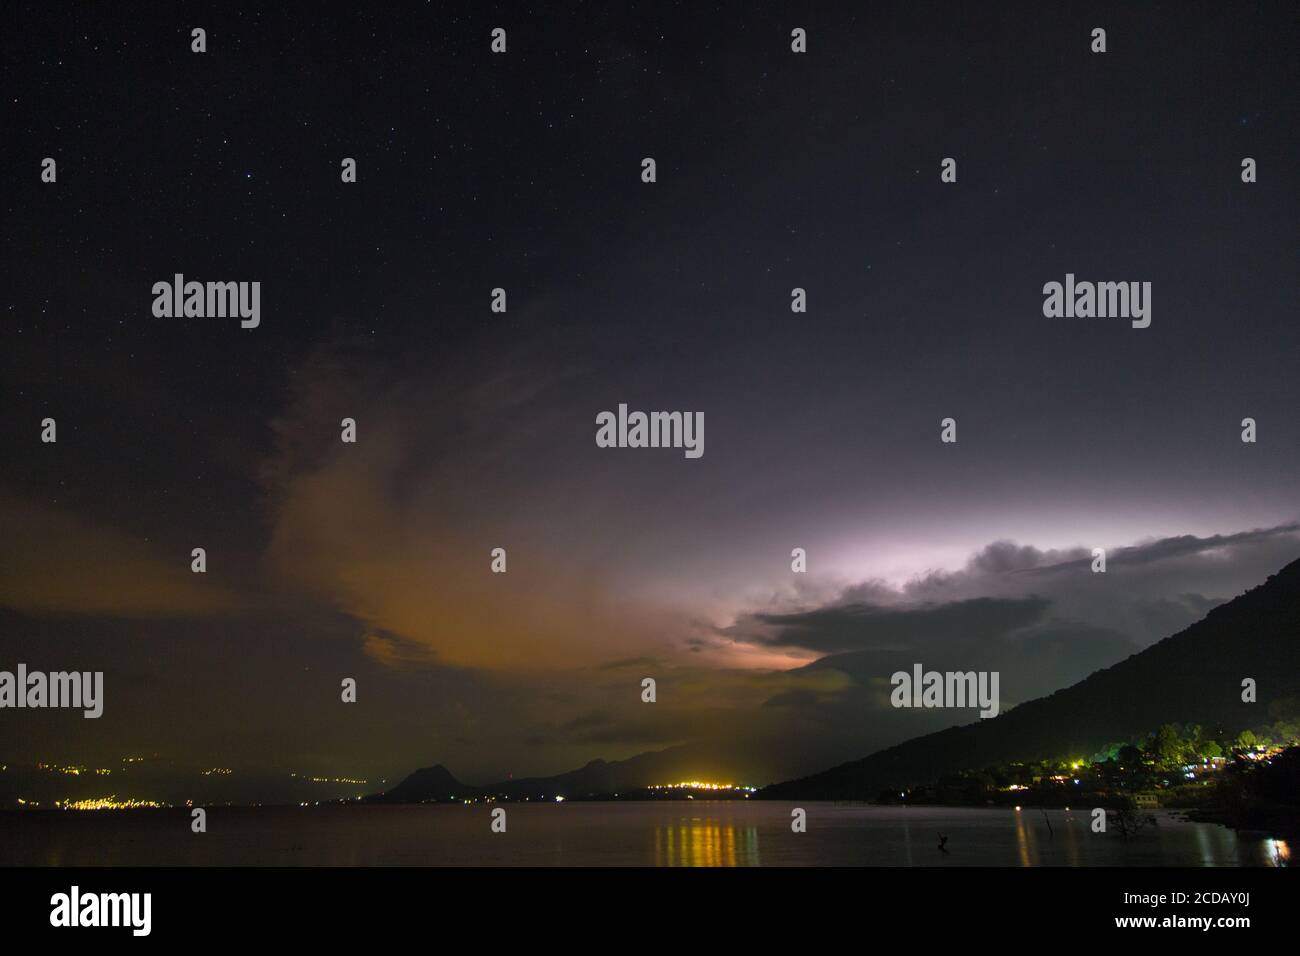 A lightning storm in the clouds over Toliman Volcano at night on Lake Atitlan, Guatemala.  Lake Atitlan is an ancient volcanic caldera or crater, fill Stock Photo